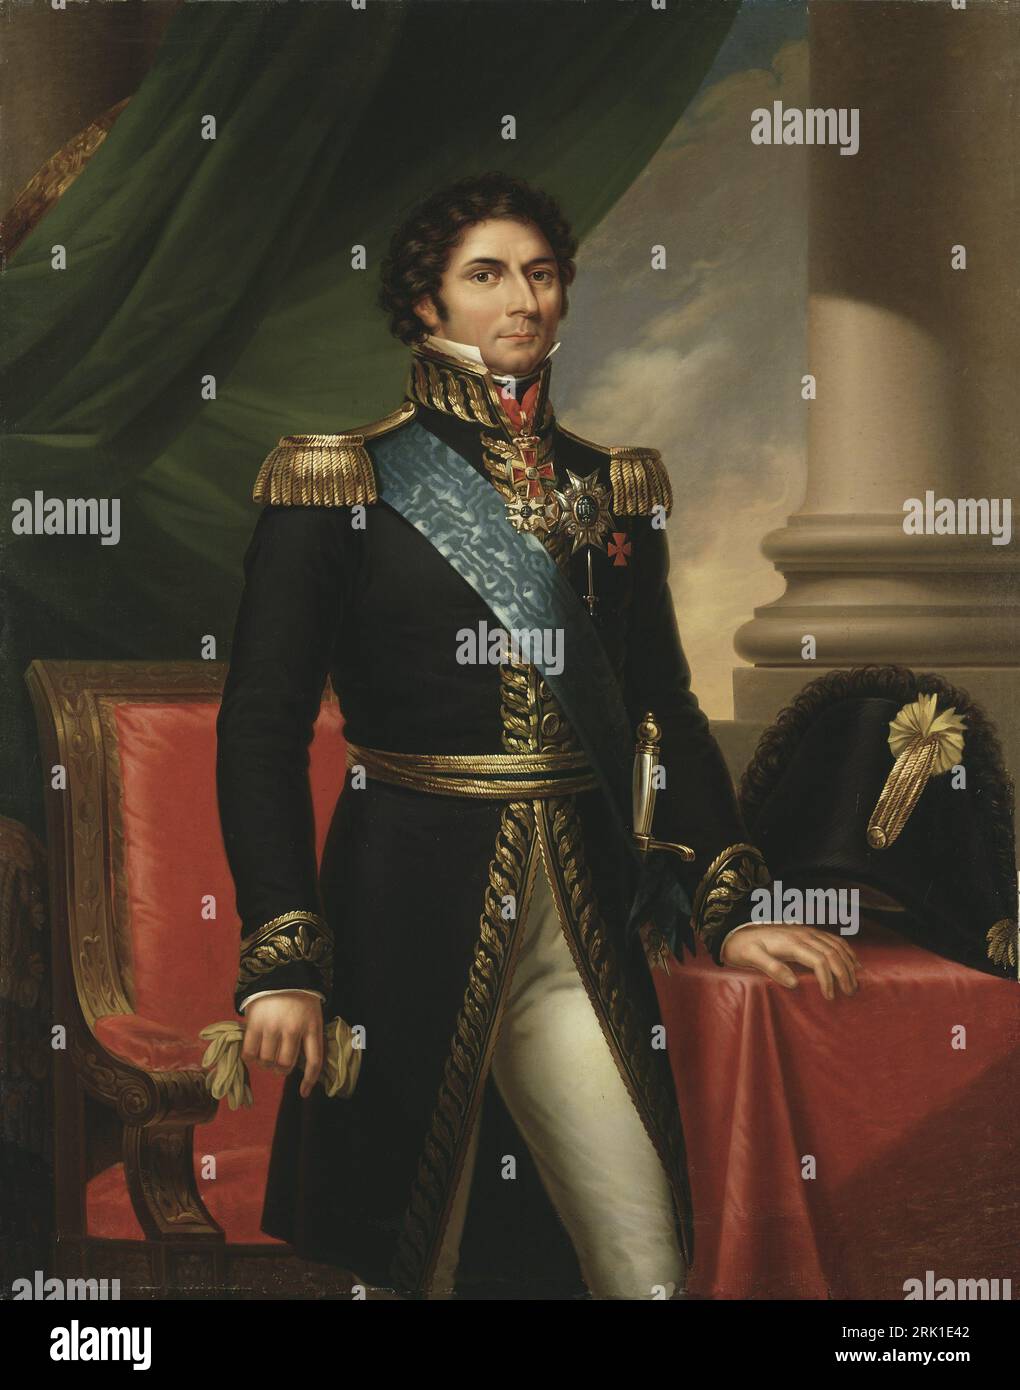 Charles XIV John Bernadotte, King of Sweden and Norway 19th century by Fredric Westin Stock Photo